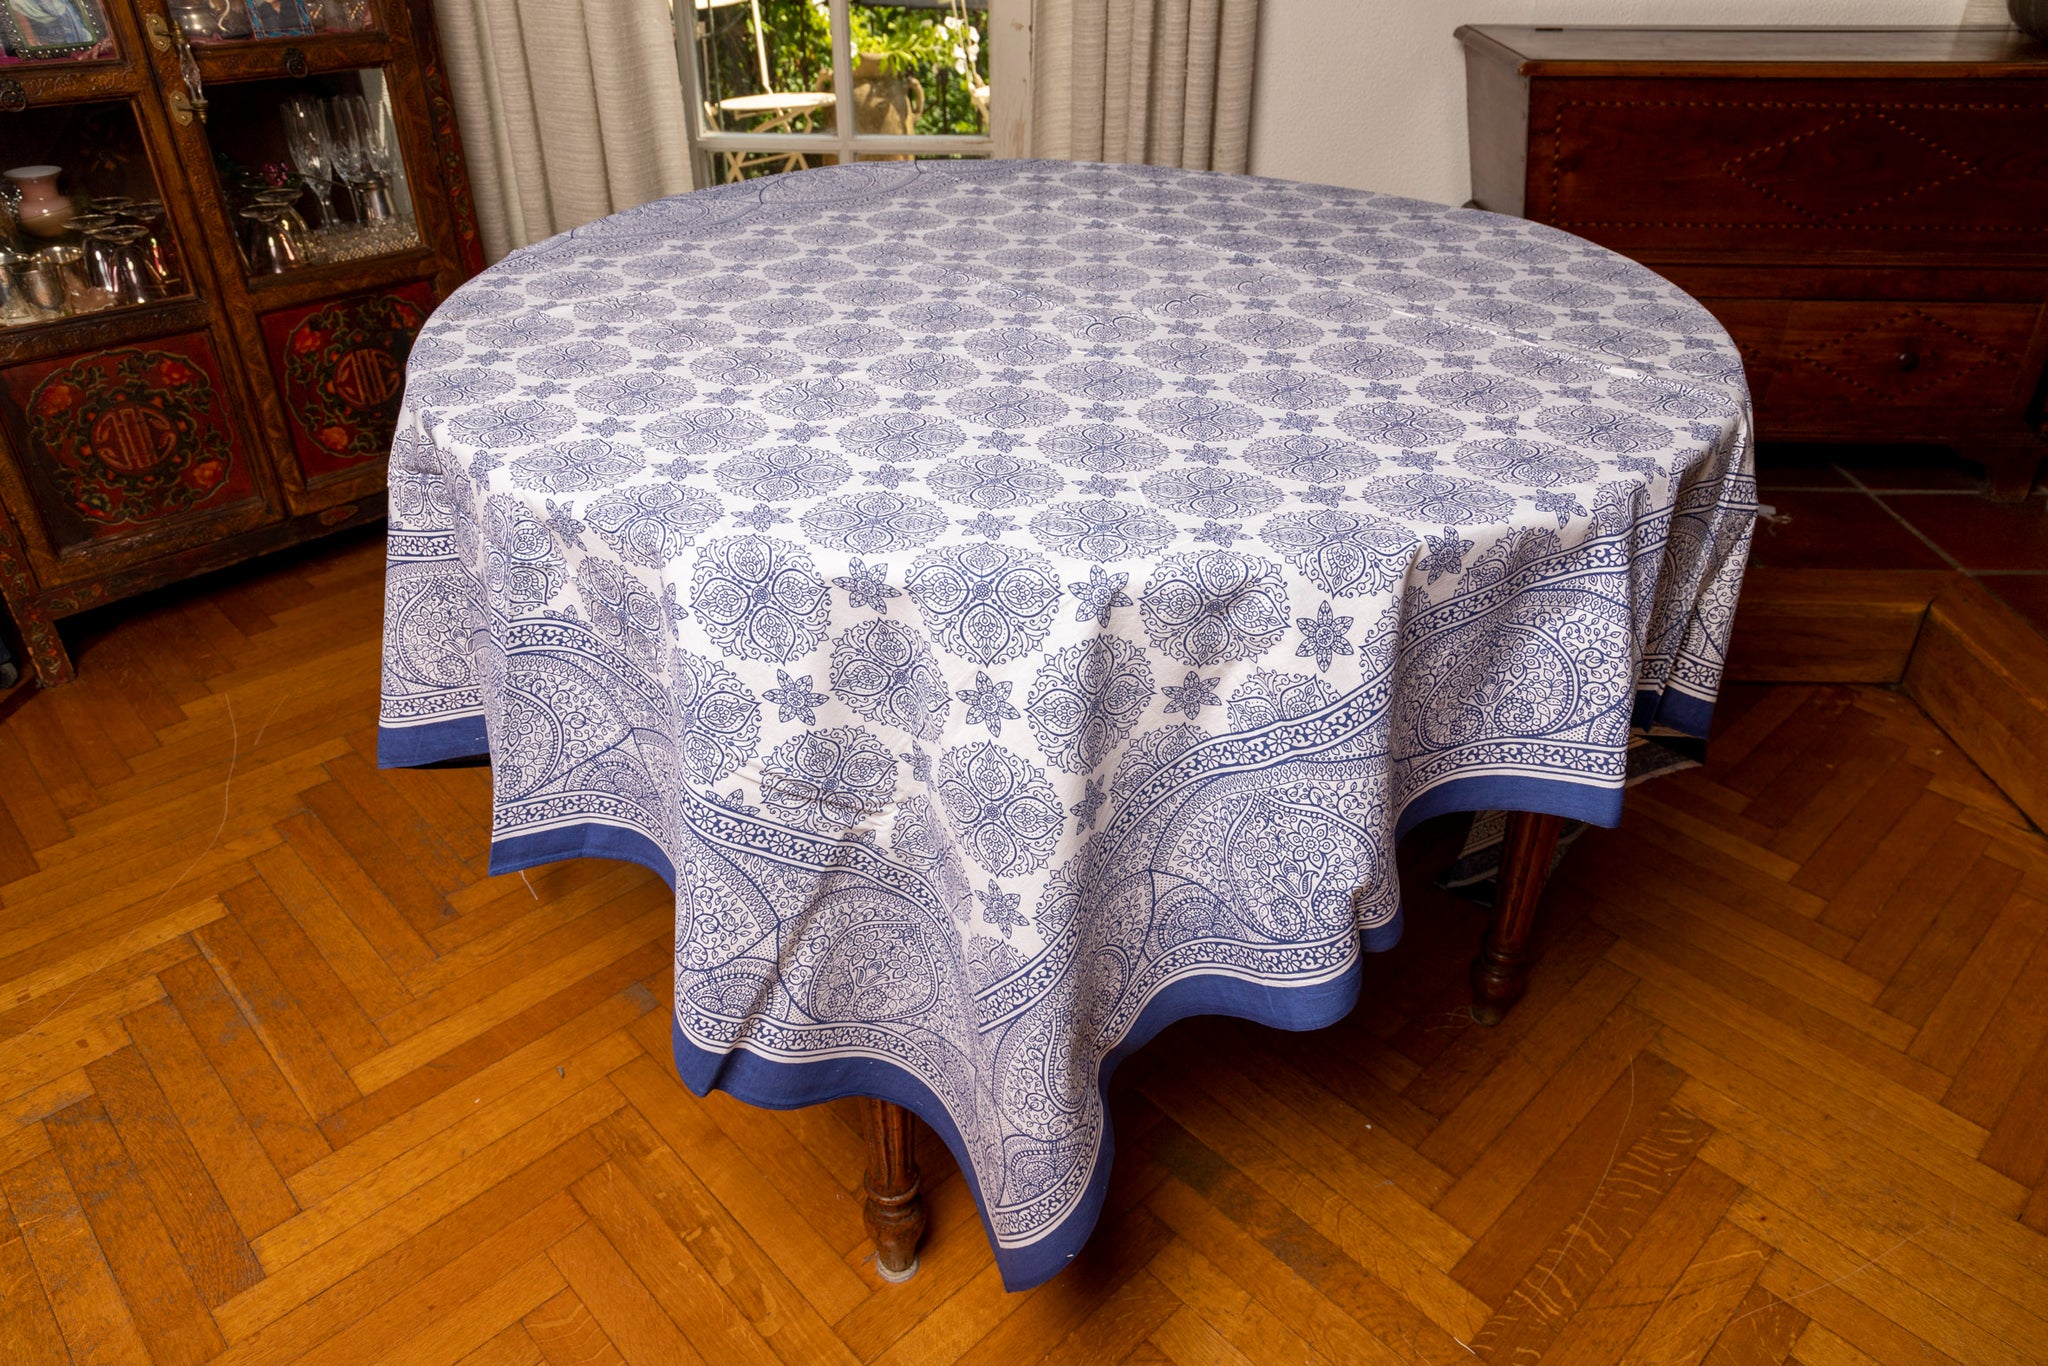 Hand-printed cotton tablecloth with geometric design 150x220cm